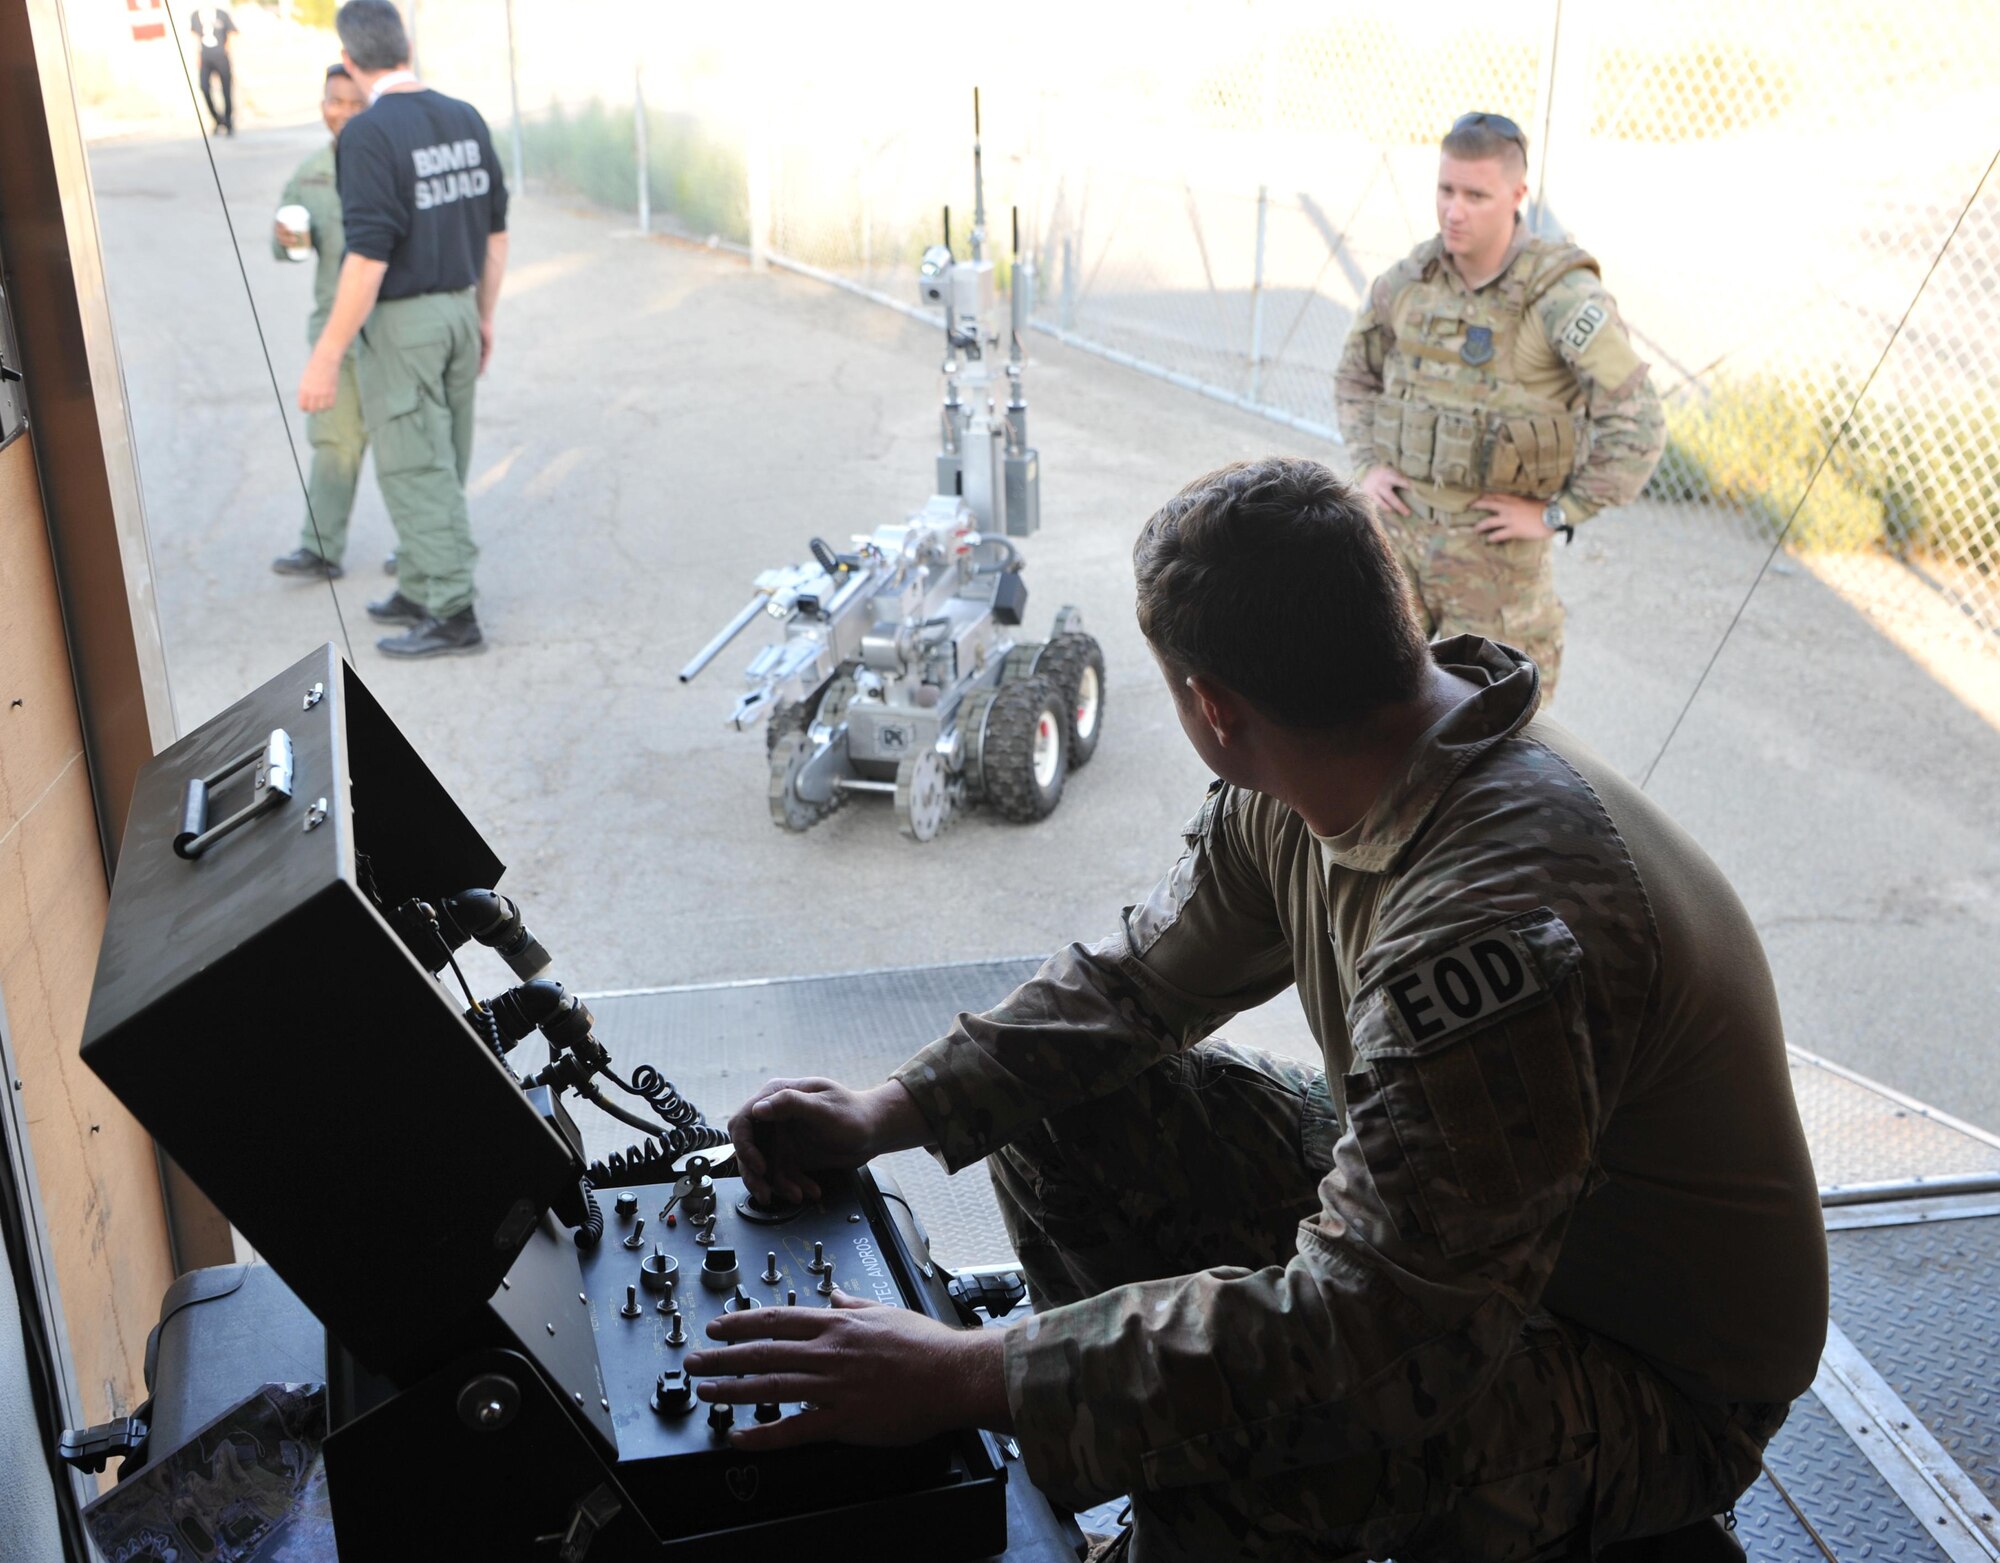 Staff Sgt. Robert Powell (front), 9th Civil Engineer Squadron explosive ordnance technician, operates a robot during Urban Shield